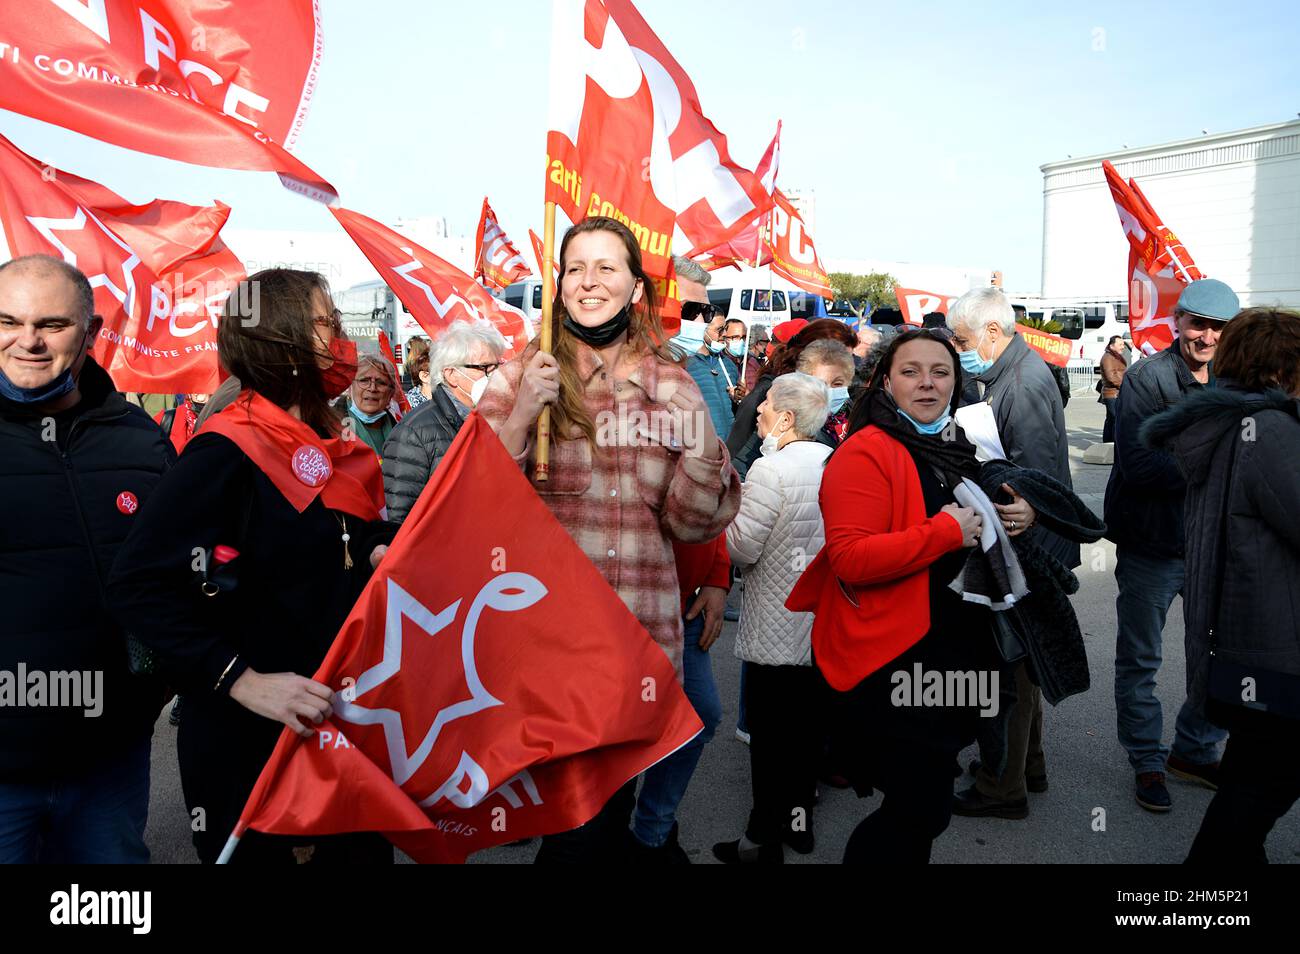 Marseille, France. 06th Feb, 2022. French Communist Party (PCF) supporters hold flags as they arrive at the first campaign meeting of the presidential candidate Fabien Roussel in Marseille.Fabien Roussel, candidate of the French Communist Party (PCF), chose Marseille for his first campaign rally in the French presidential election. (Photo by Gerard Bottino/SOPA Images/Sipa USA) Credit: Sipa USA/Alamy Live News Stock Photo